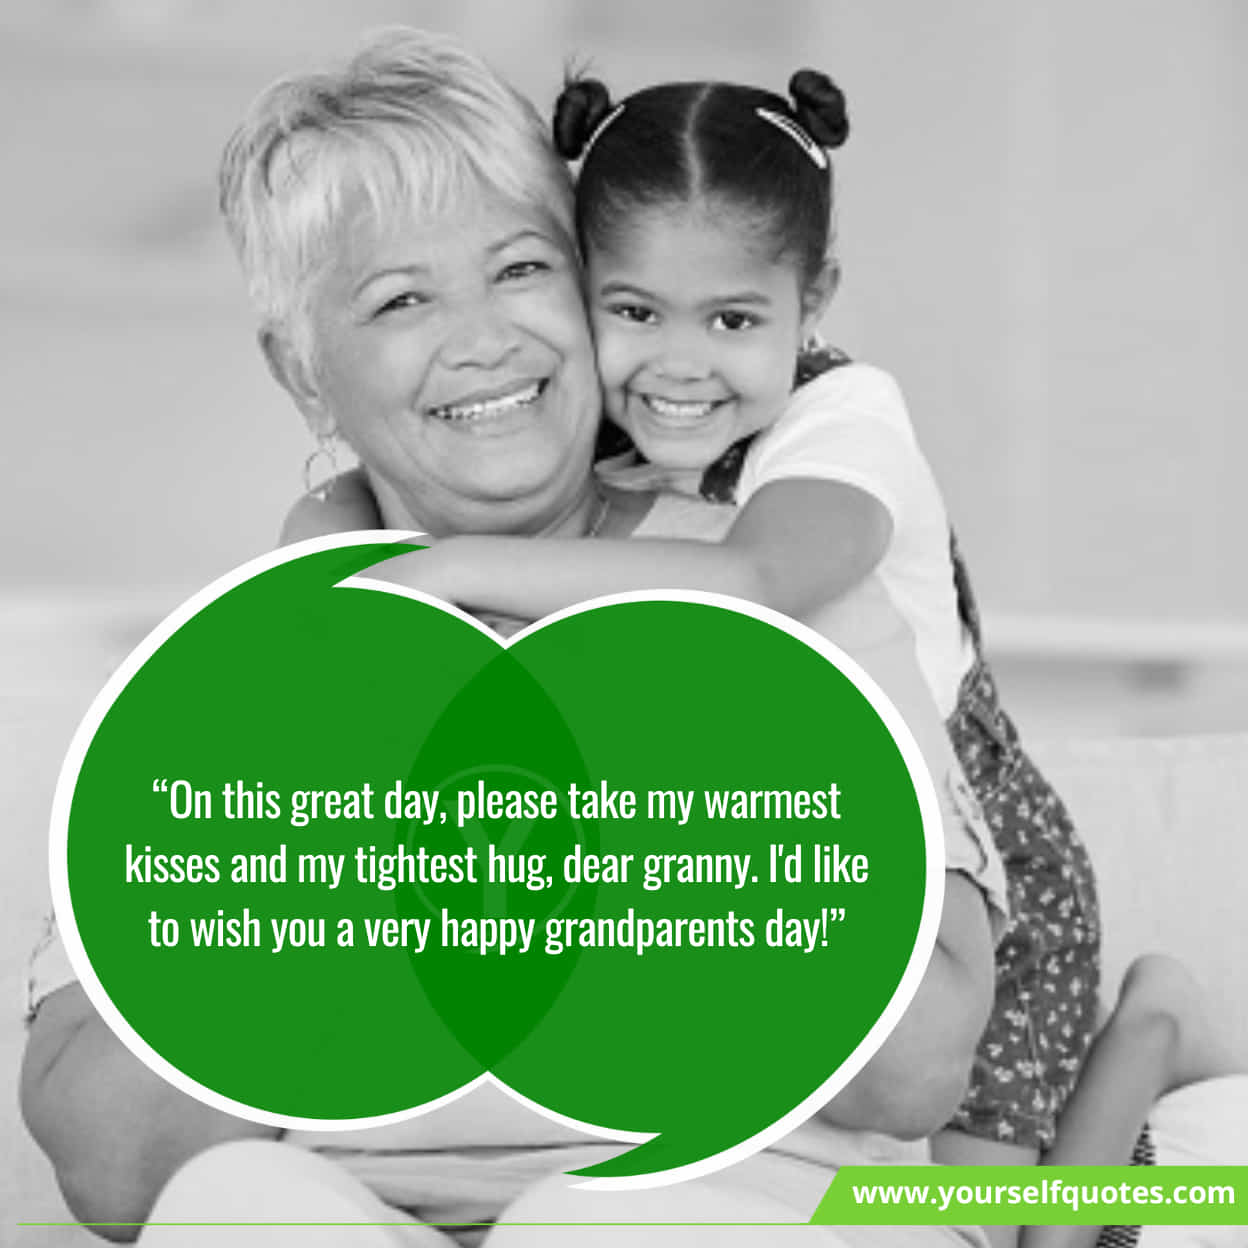 Beautiful Grateful Messages About Happy Grandparents Day